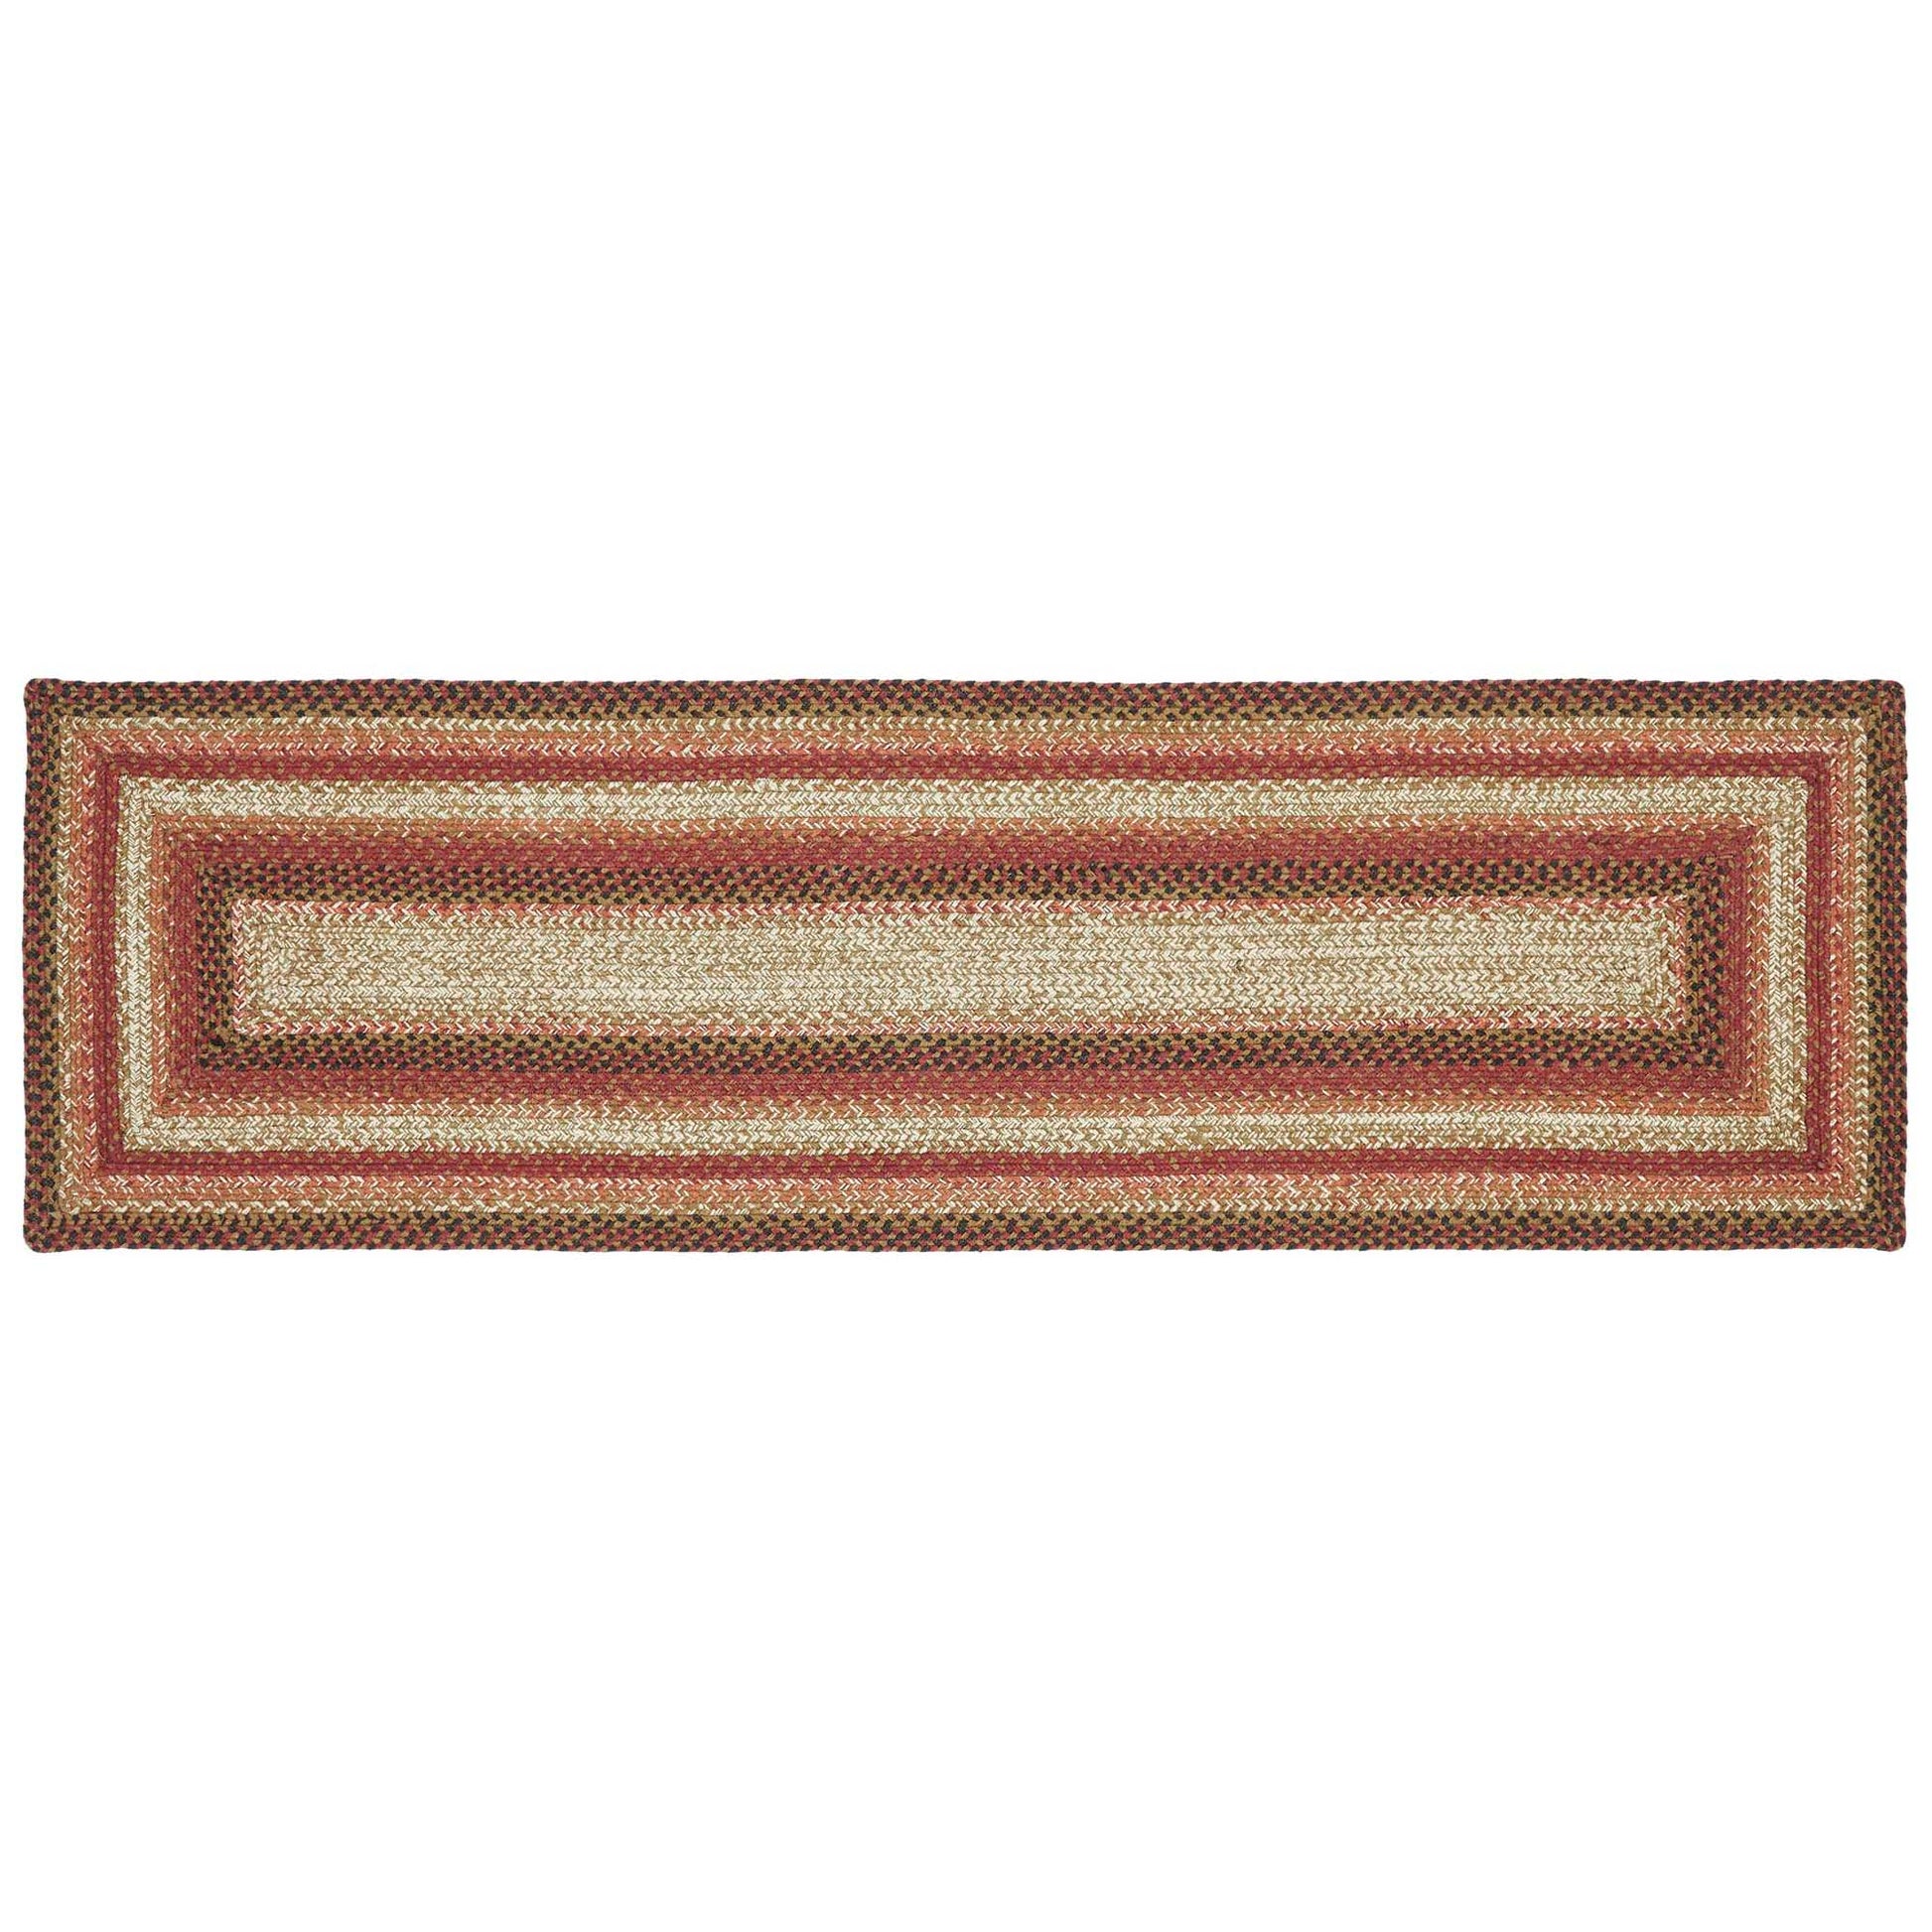 67119-Ginger-Spice-Jute-Rug-Runner-Rect-w-Pad-22x72-image-3